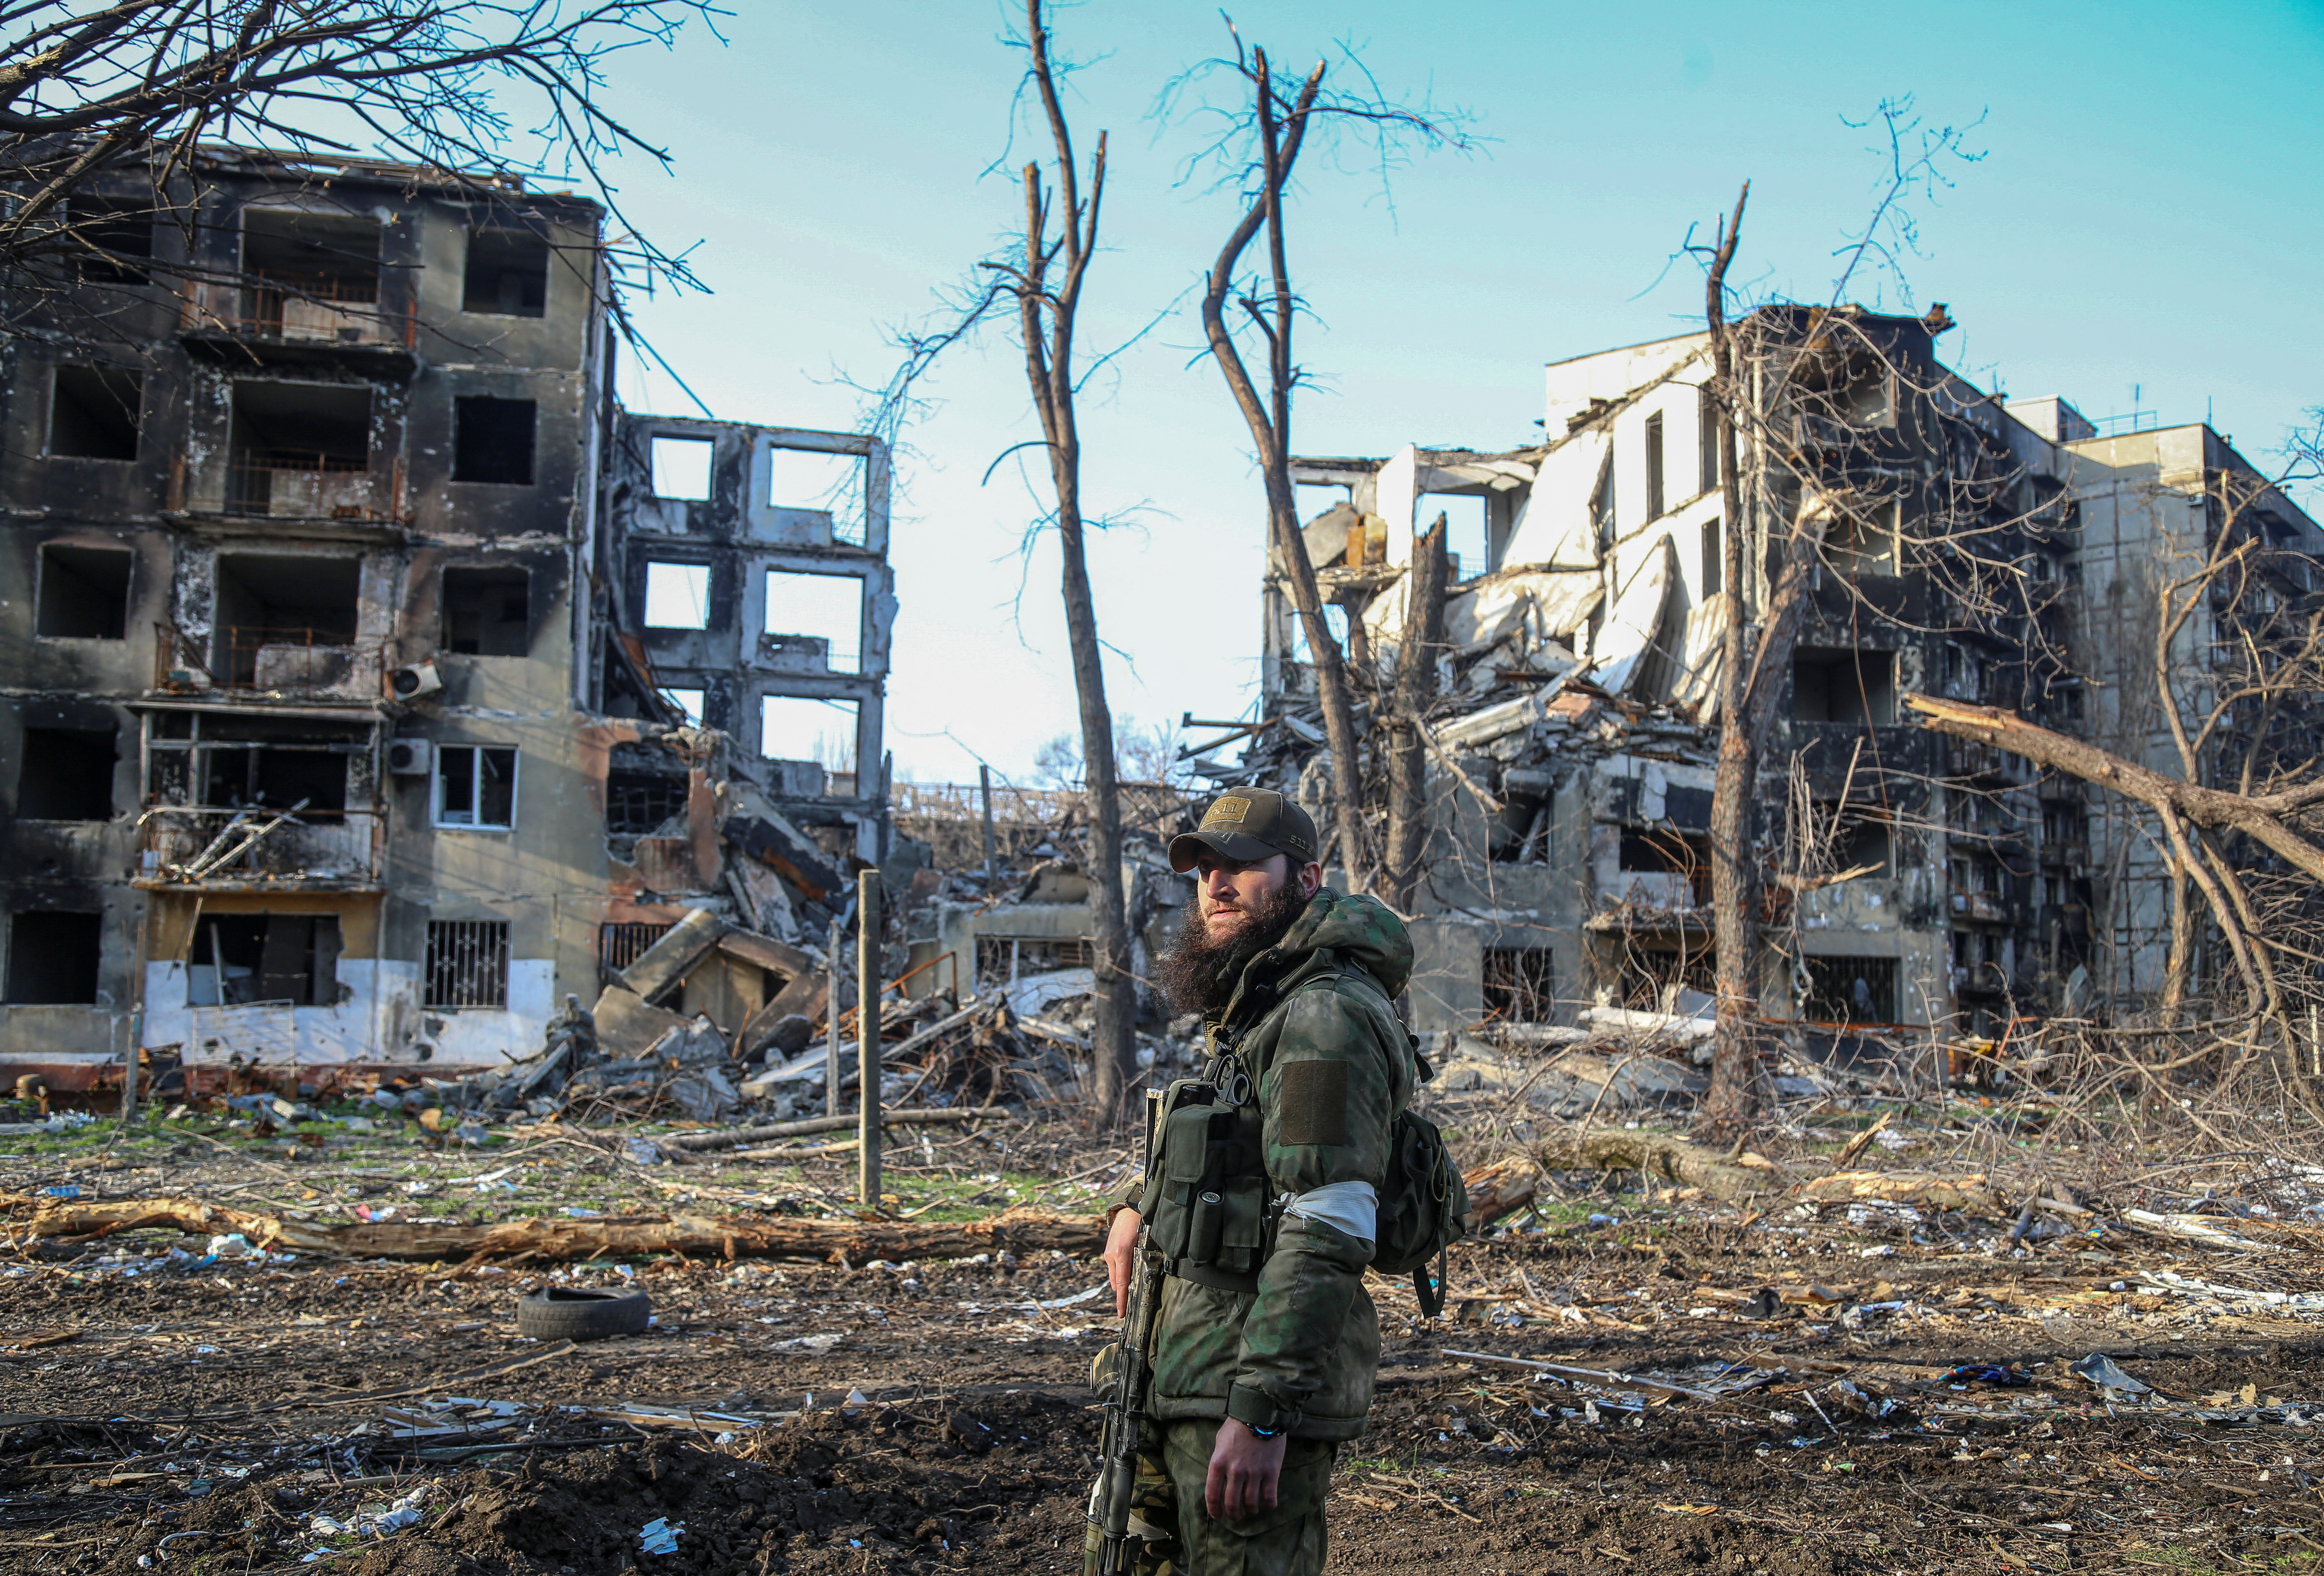 A service member from Chechen Republic looks on during fighting in Ukraine-Russia conflict in Mariupol